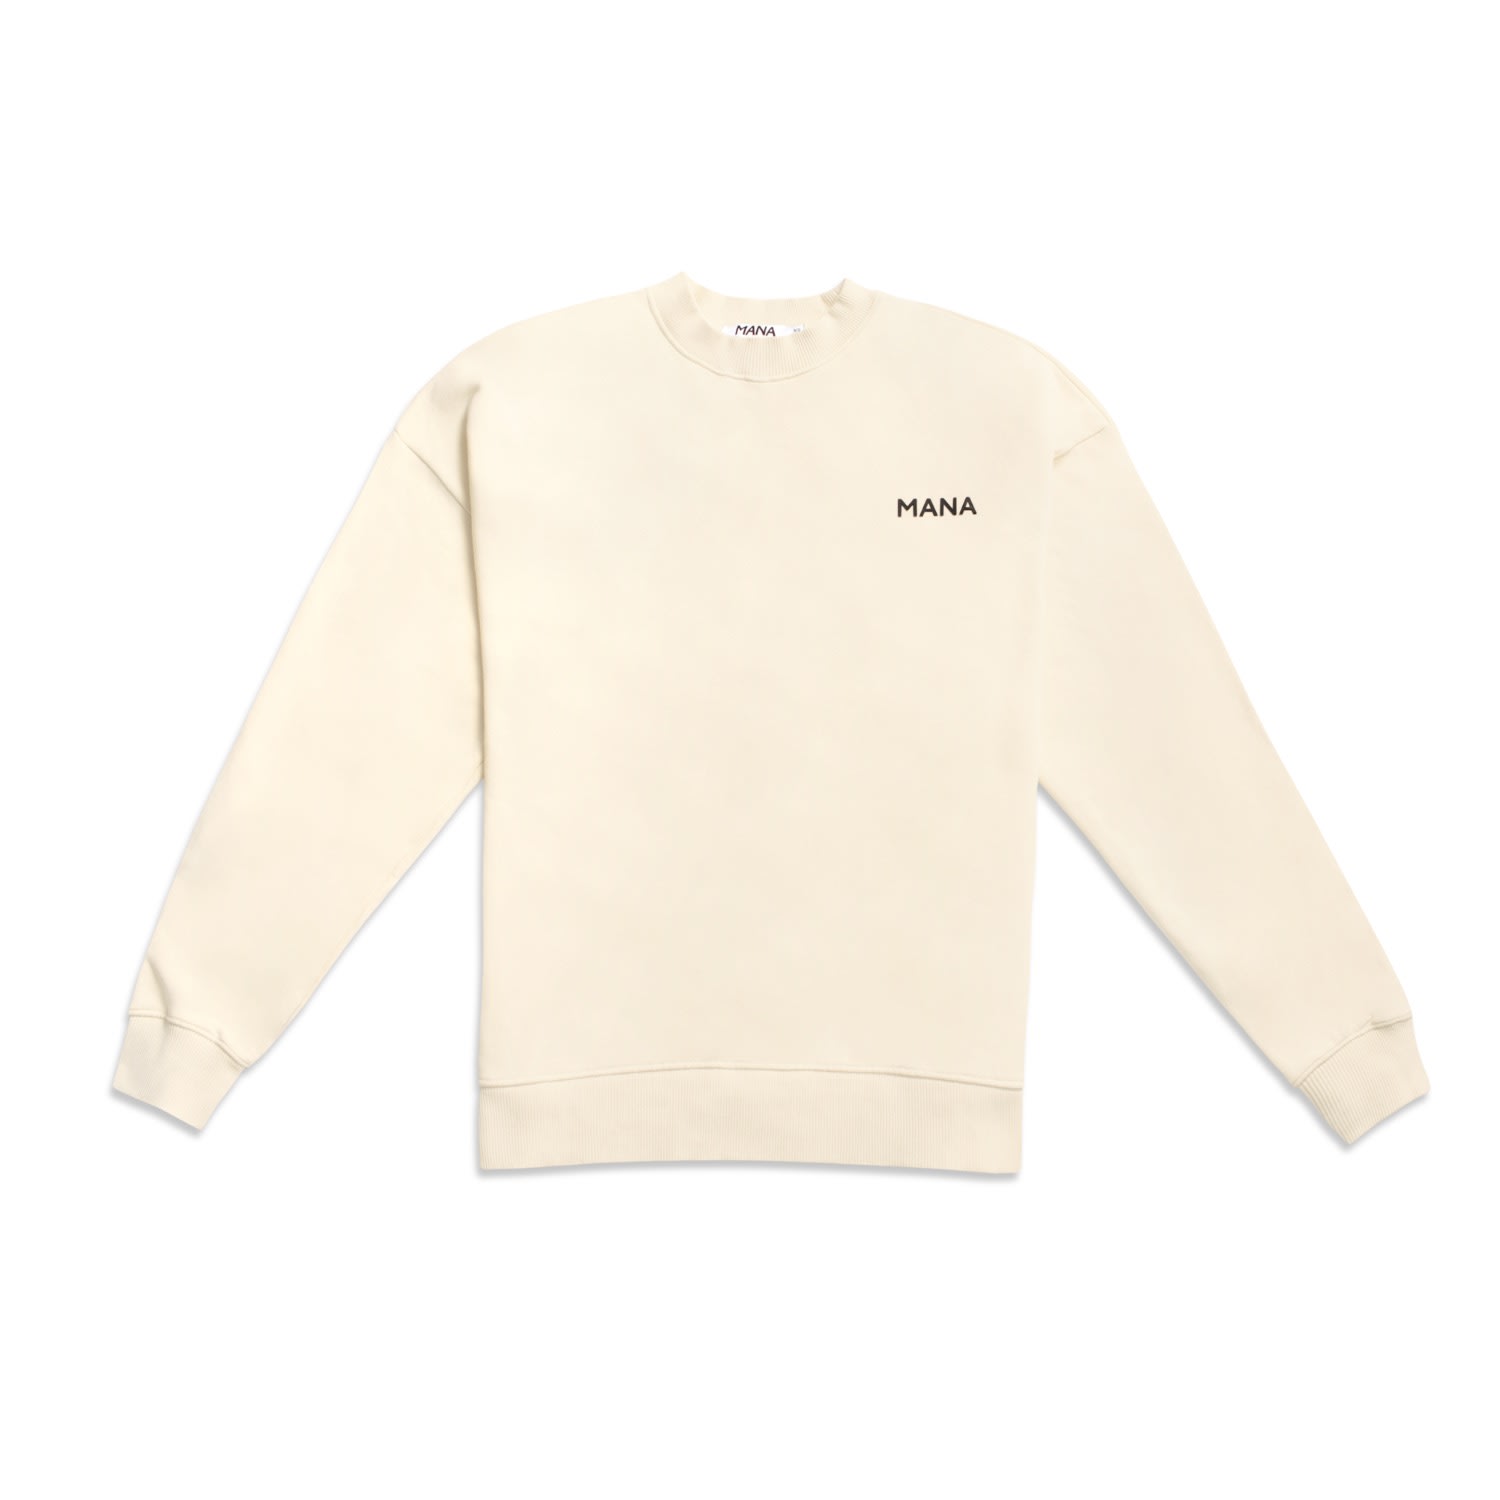 Neutrals Deluxe Sweatshirt Mens In Ivory Cream Extra Small MANA The Movement